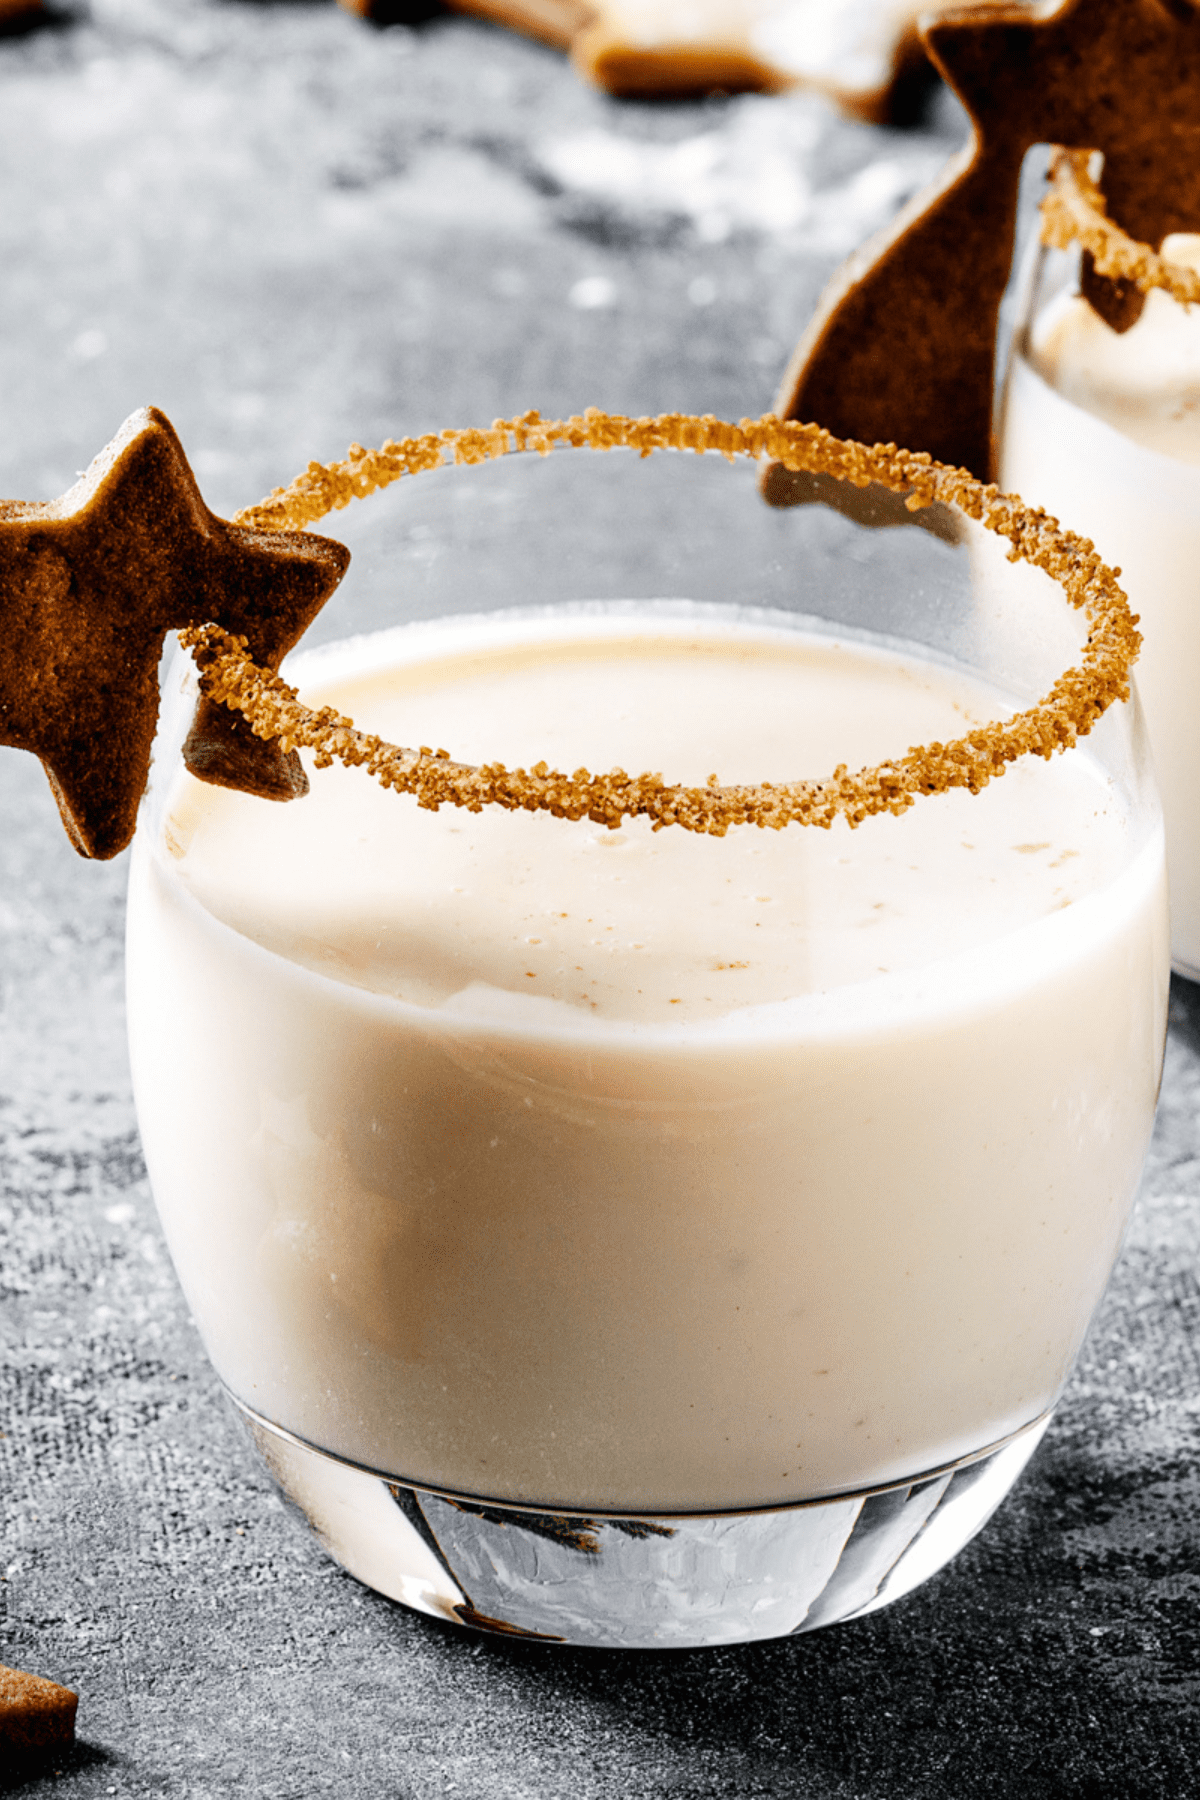 Eggnog in a glass with cinnamon, served in two glasses with star shape sugar cookies, fir branch over gray background.